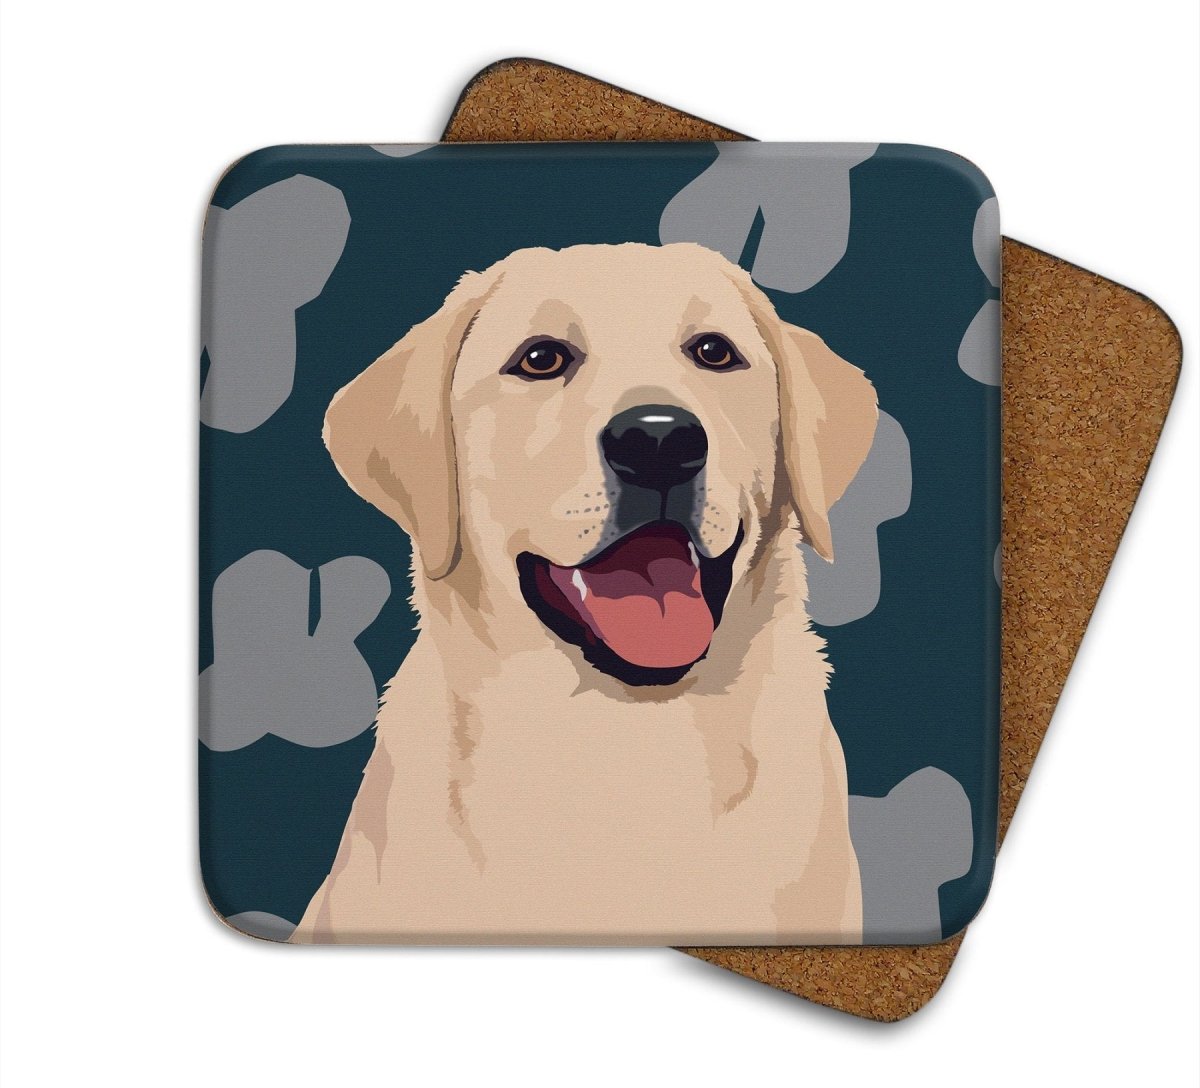 Dogs Coaster Set by Leslie Gerry, Set of 4